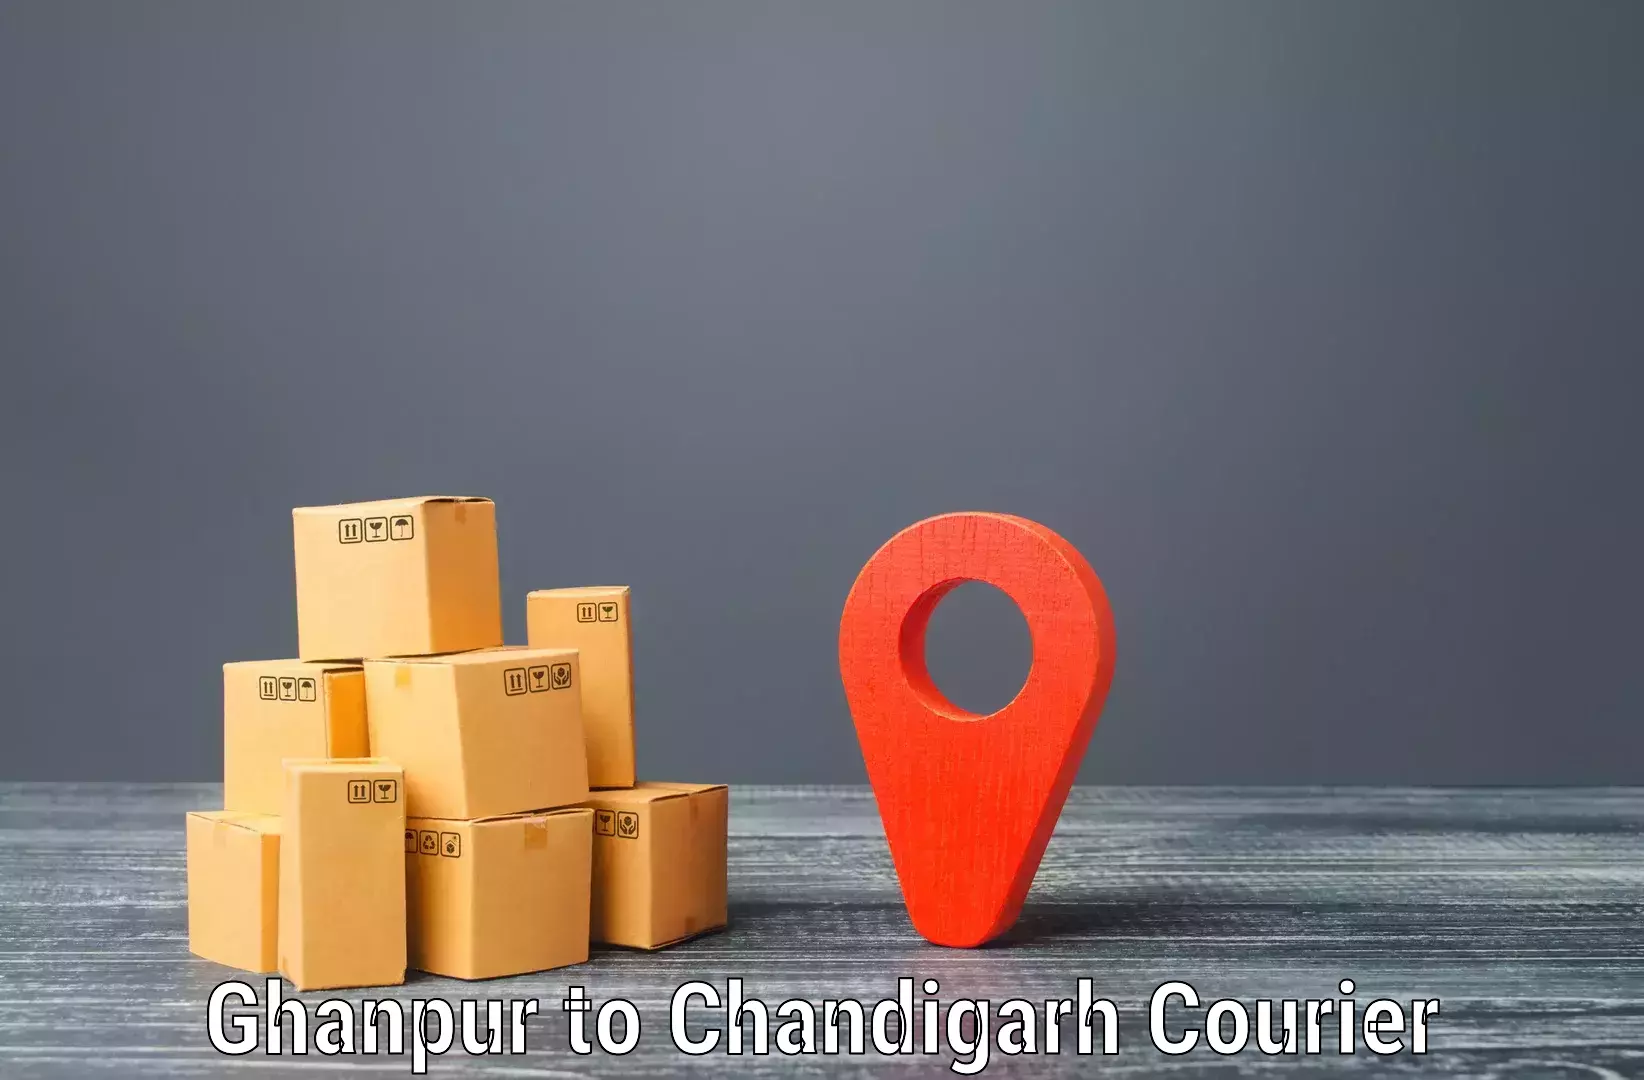 Express delivery network Ghanpur to Panjab University Chandigarh